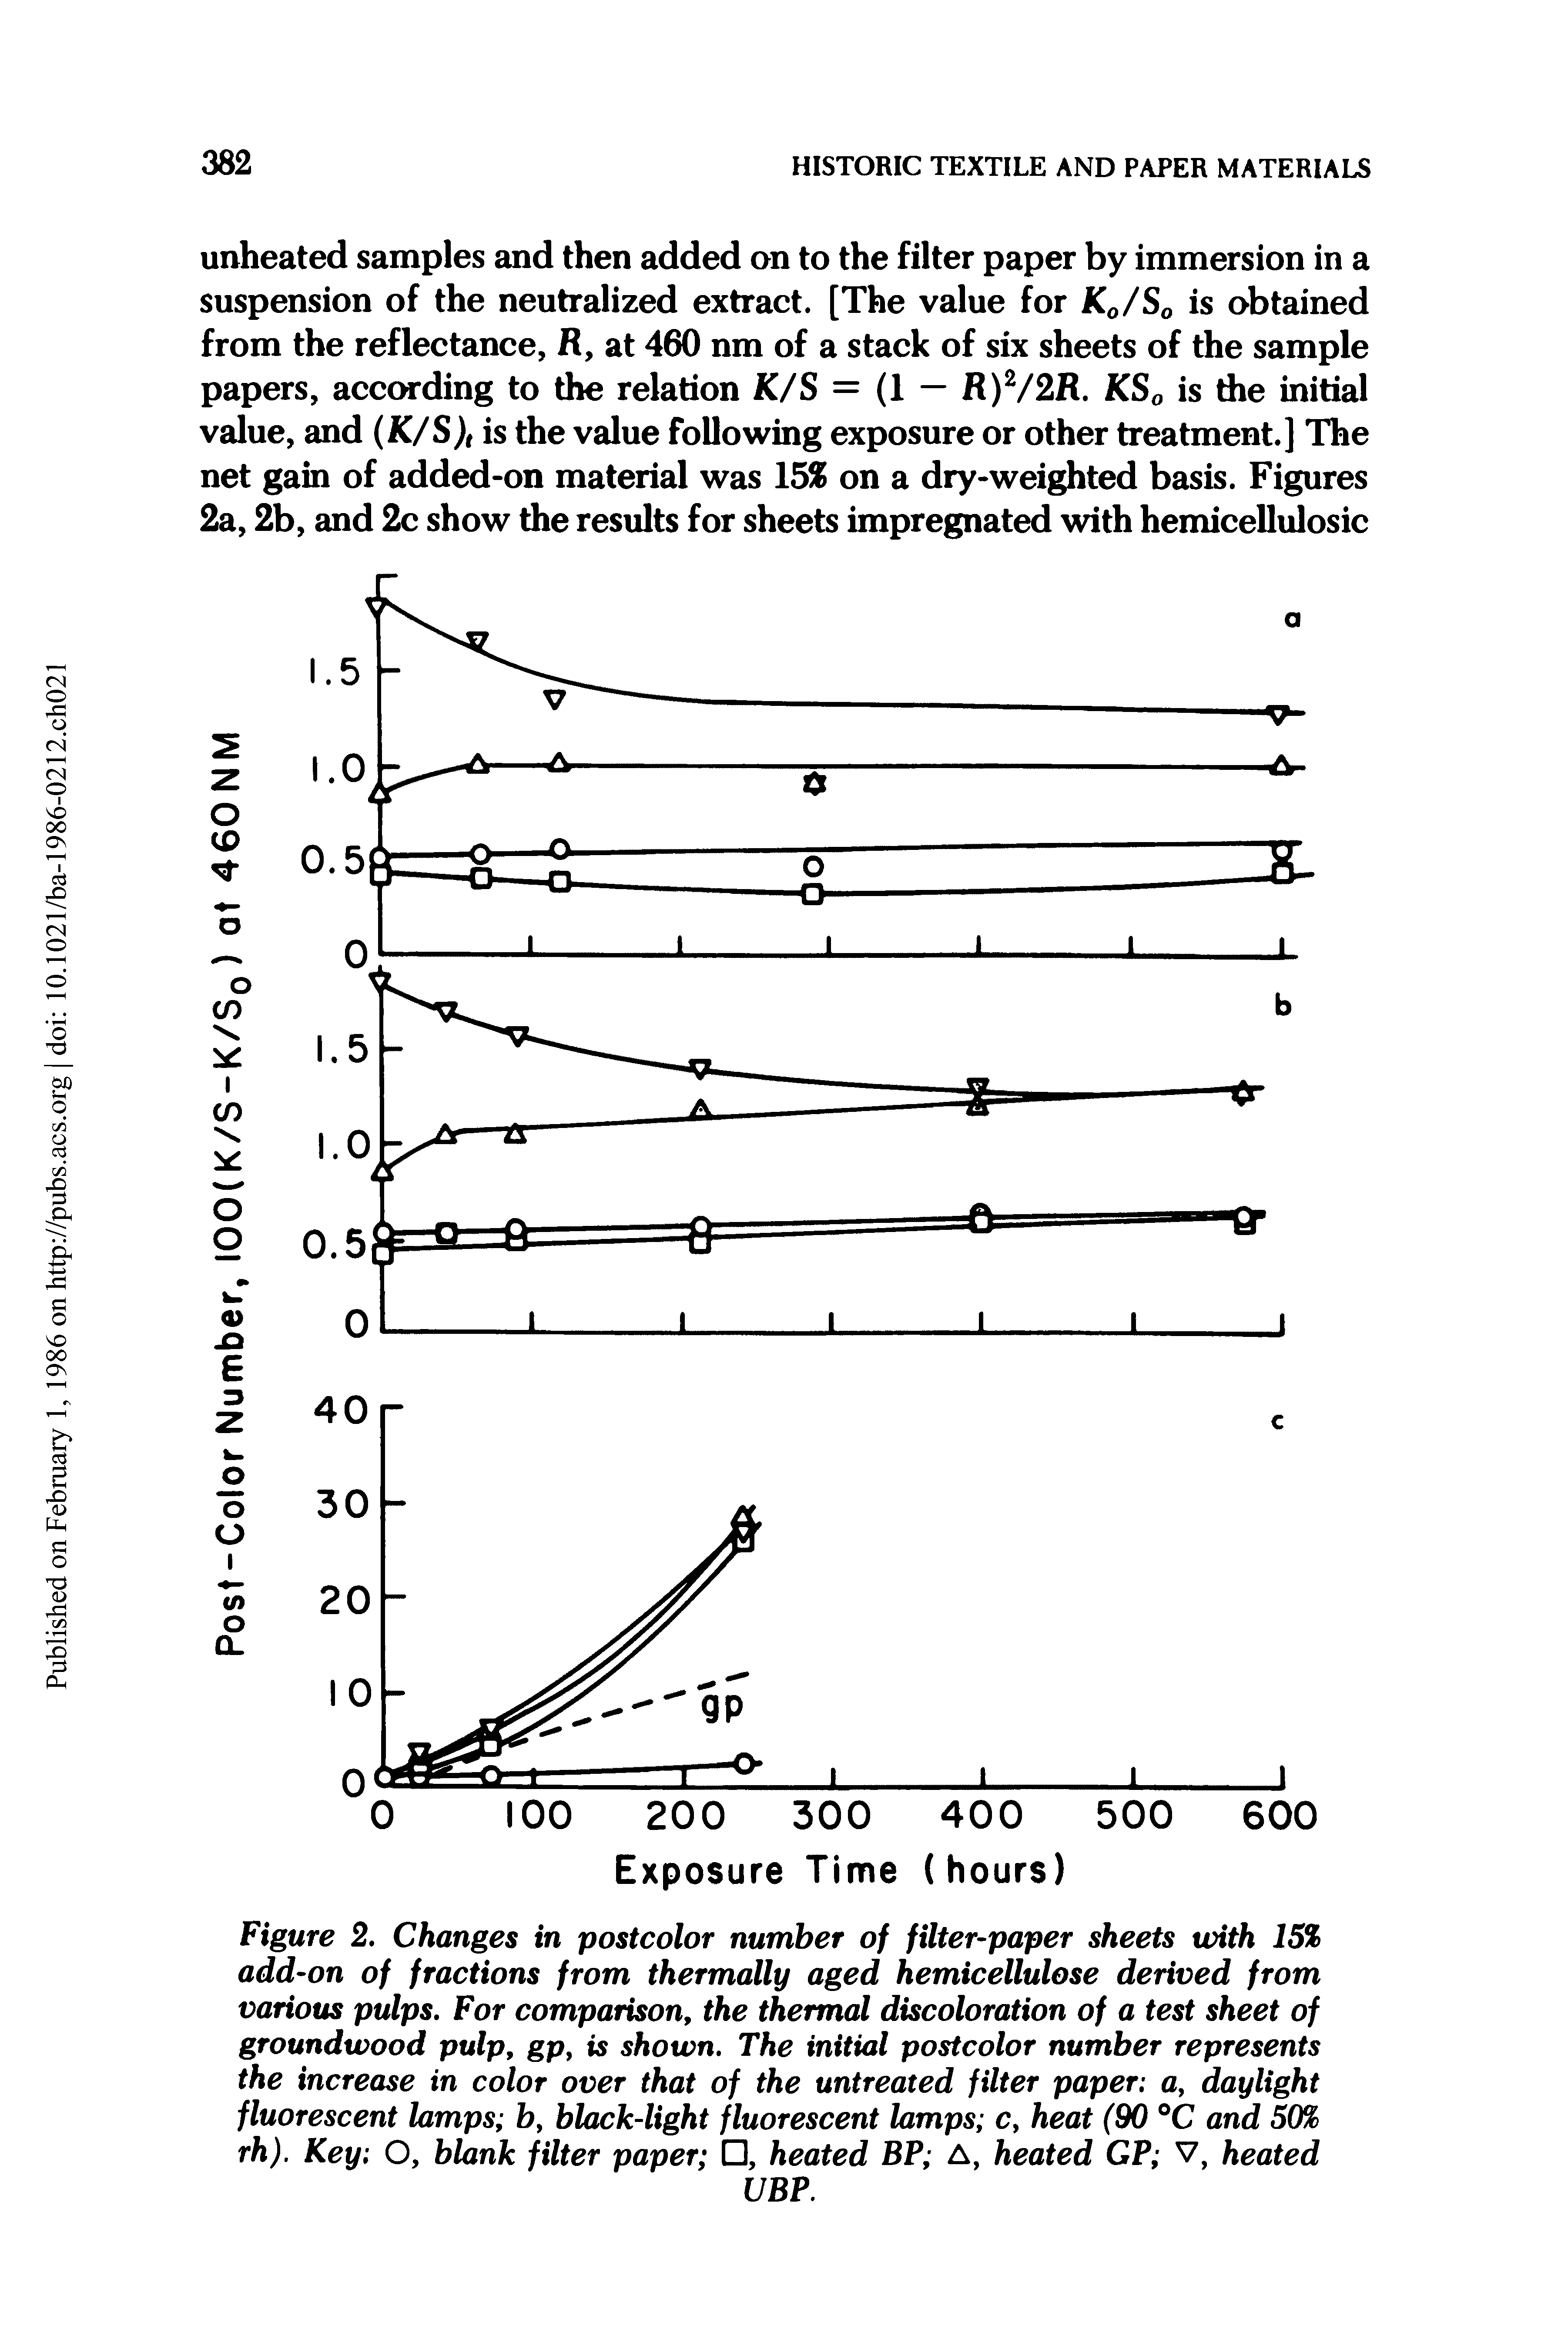 Figure 2. Changes in postcolor number of filter-paper sheets with 15% add-on of fractions from thermally aged hemicellulose derived from various pulps. For comparison, the thermal discoloration of a test sheet of groundwood pulp, gp, is shown. The initial postcolor number represents the increase in color over that of the untreated filter paper a, daylight fluorescent lamps b, black-light fluorescent lamps c, heat (90 °C and 50% rh). Key O, blank filter paper , heated BP A, heated GP V, heated...